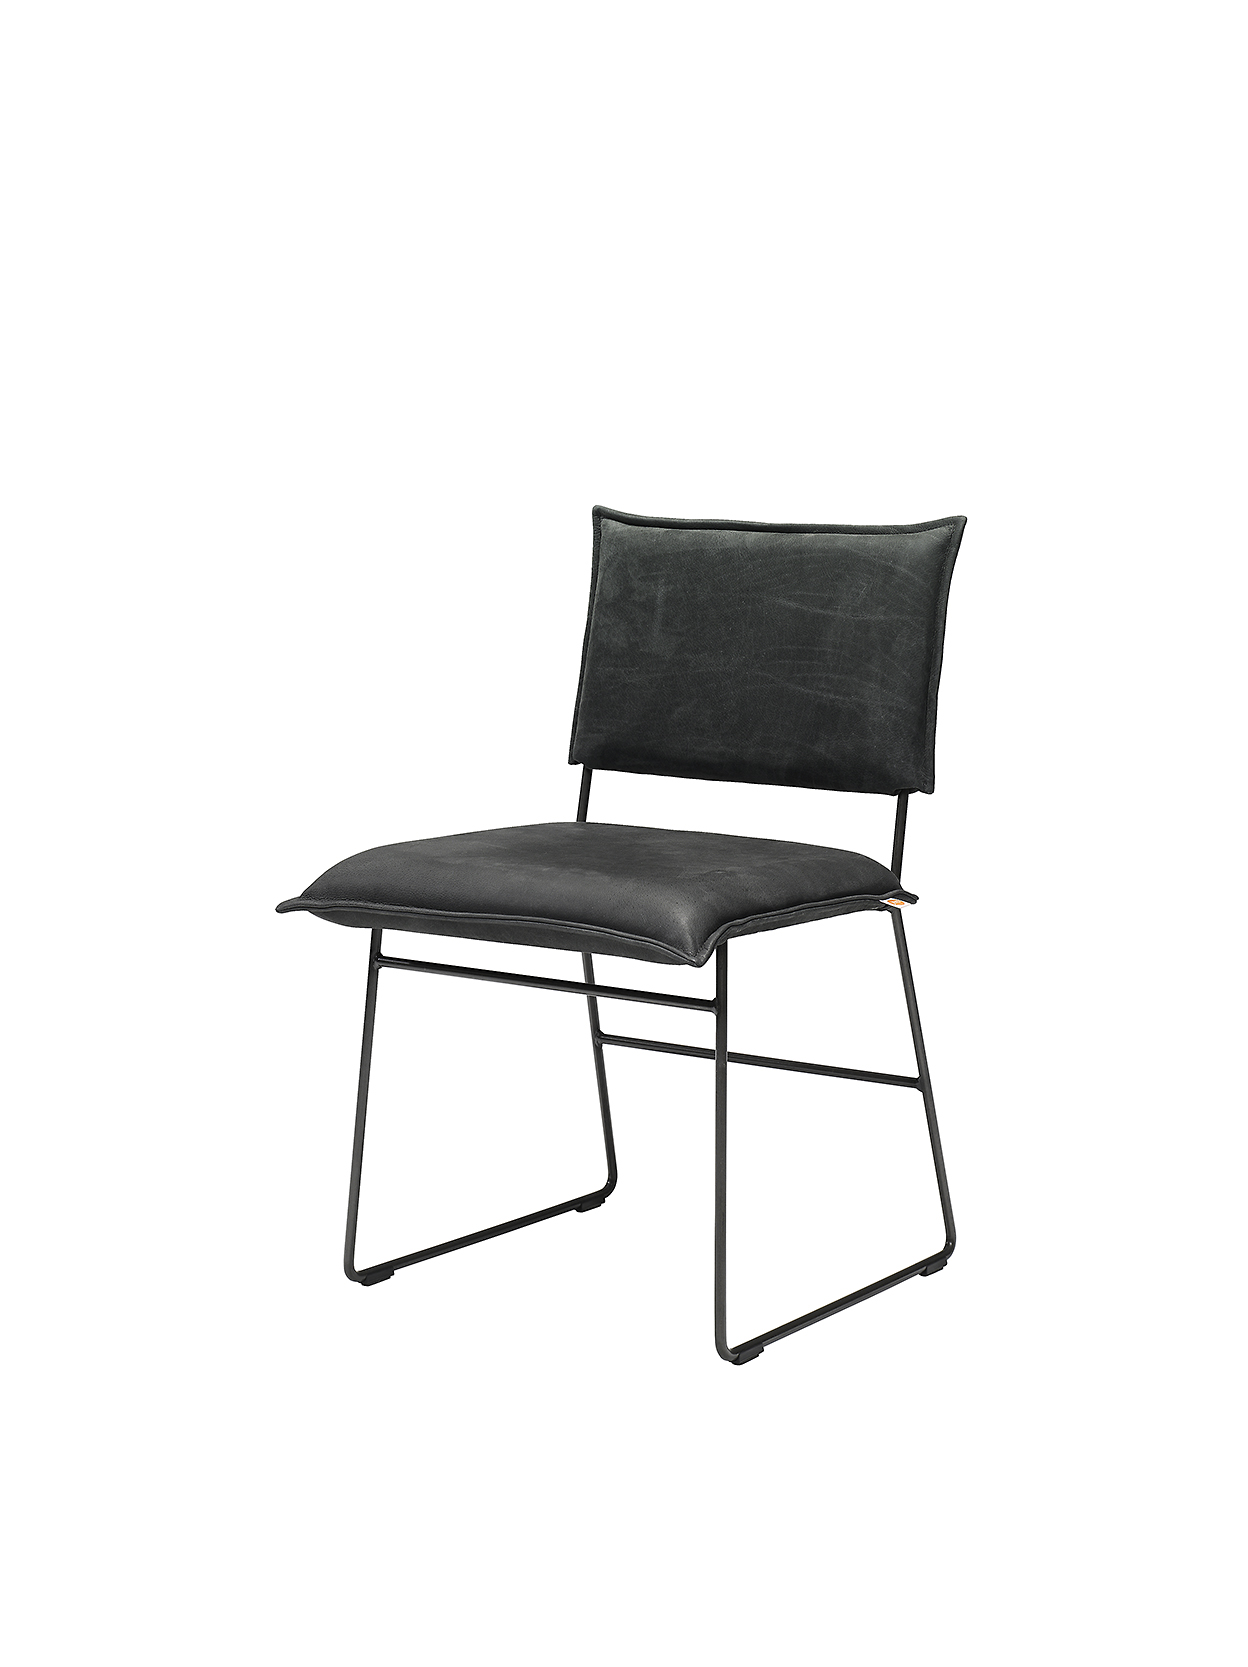 Norman Chair Without Arm Aurula Black Pers LR ZS 8720153744447